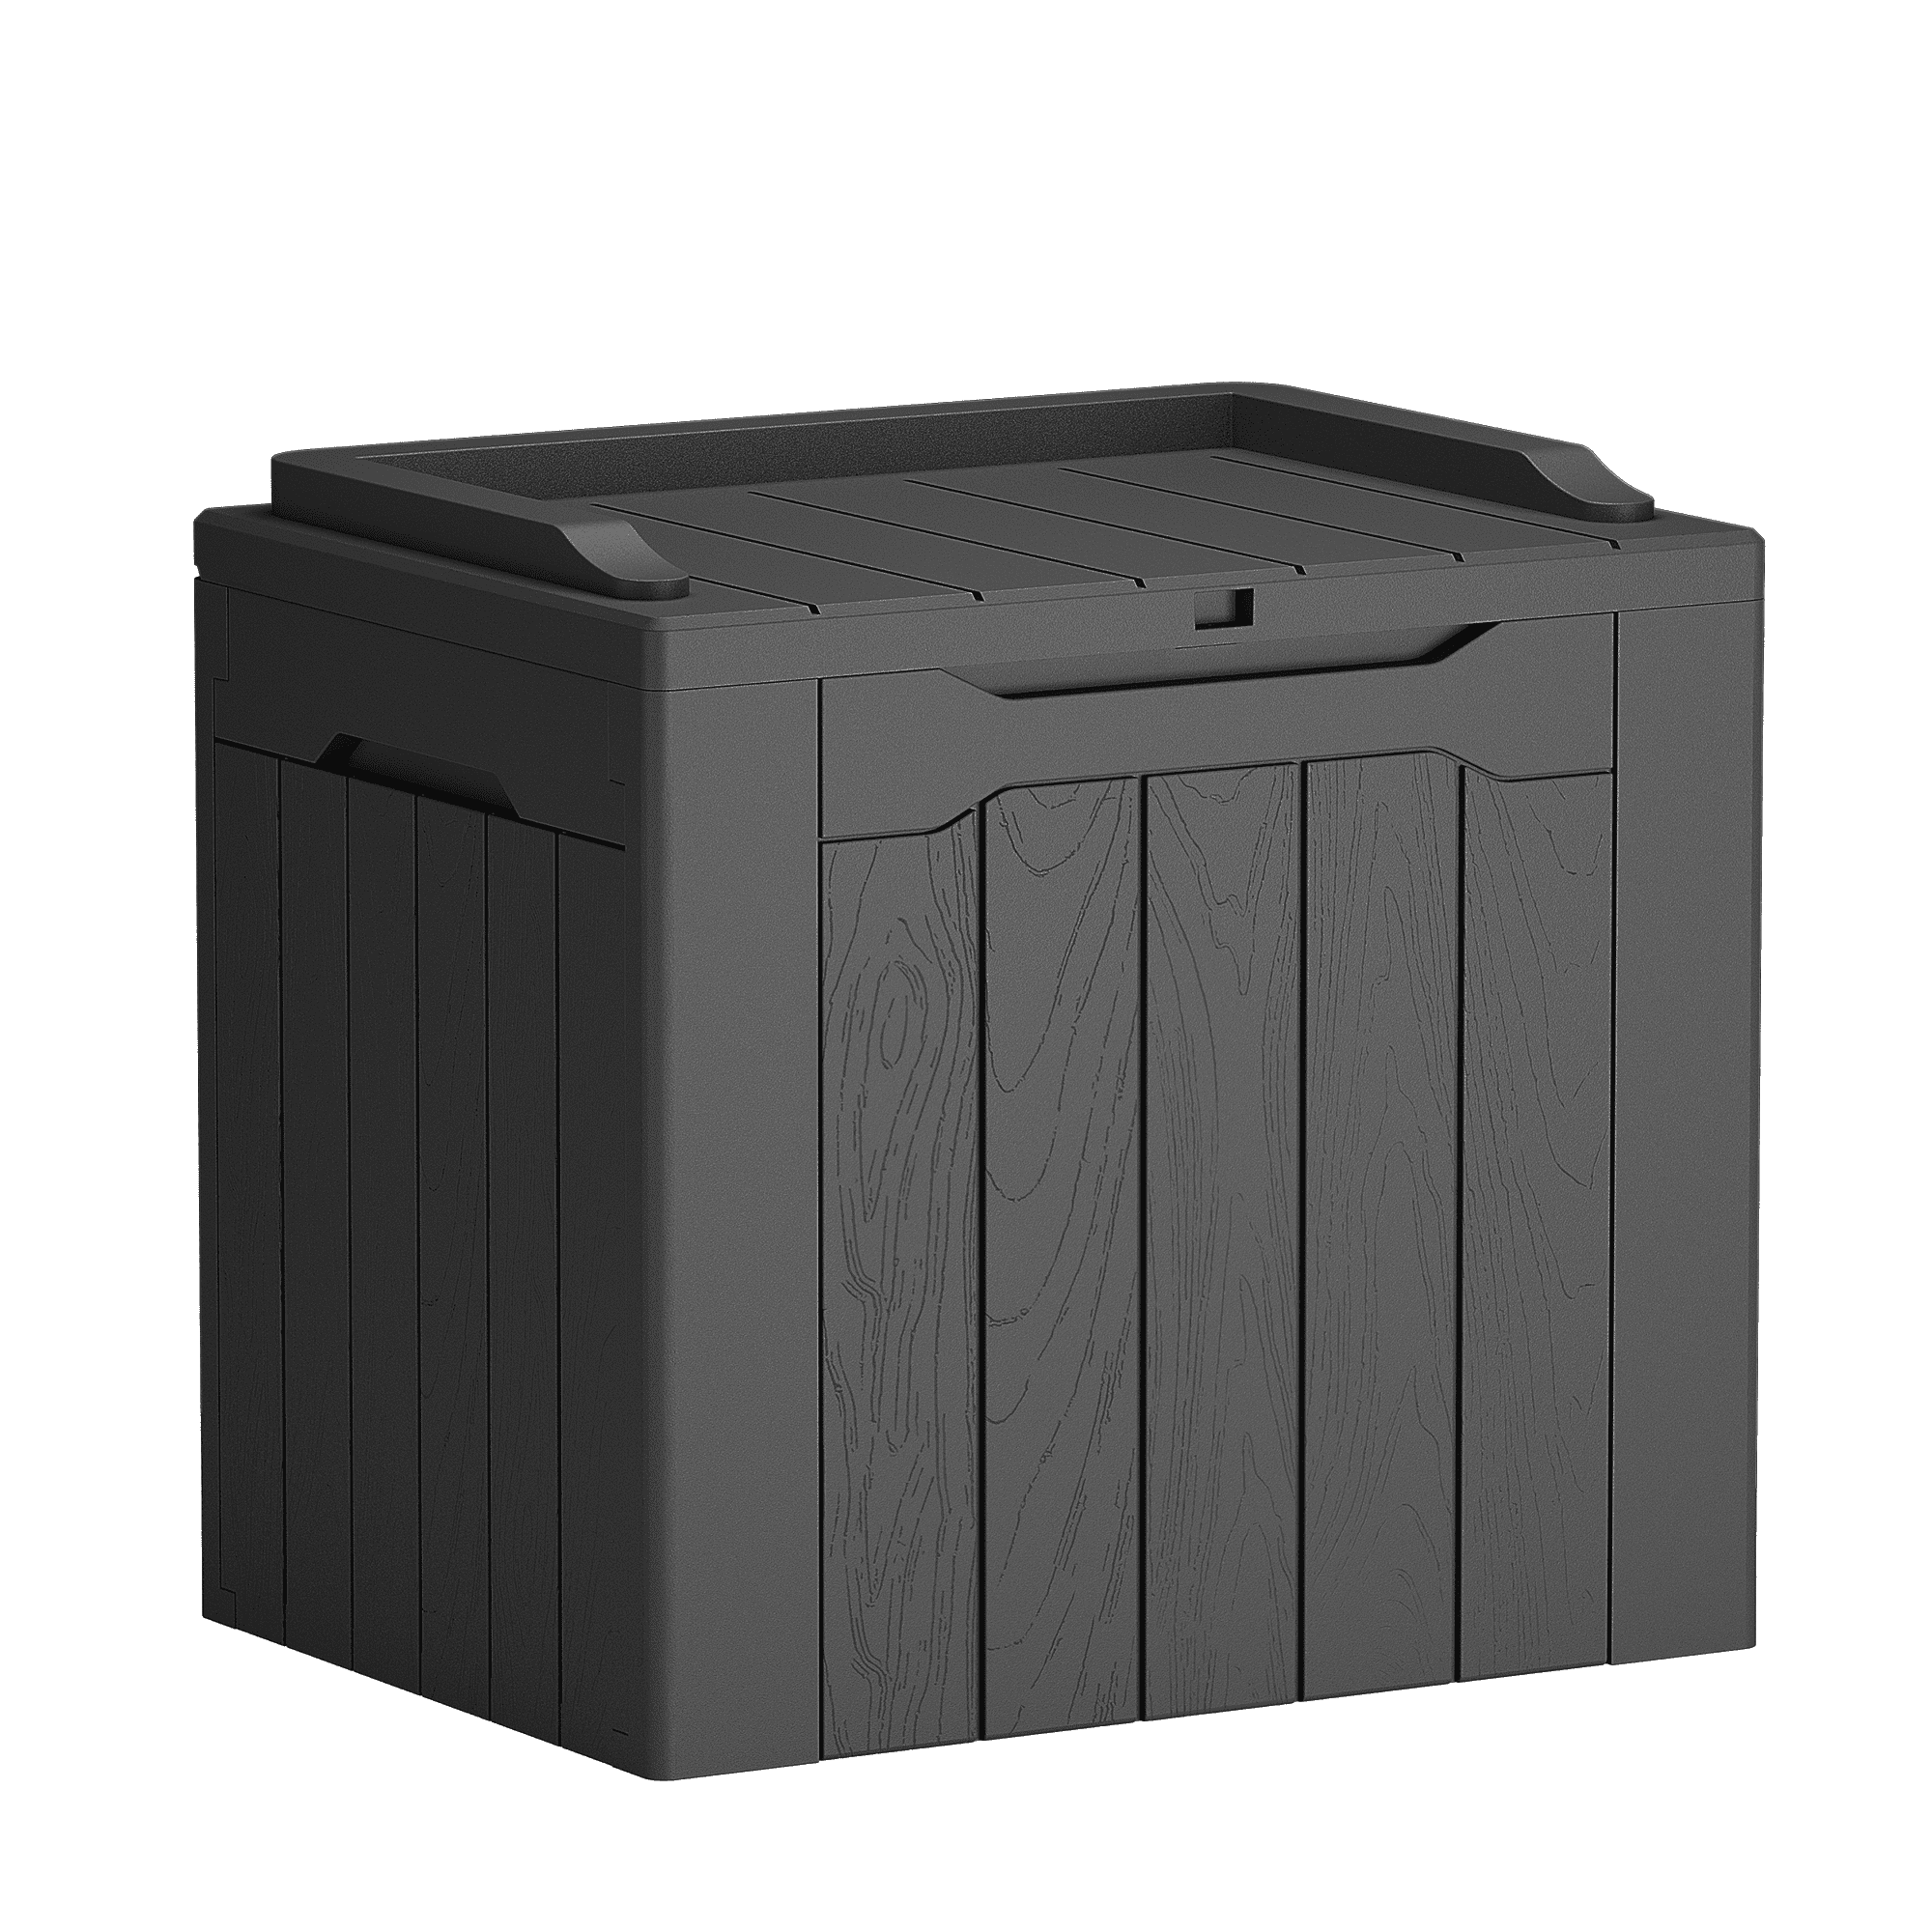 75 Gallon Resin Deck Box on Wheels, Patio Large Storage Cabinet, Outdoor Waterproof Storage Chest, Storage Container for Outside Furniture Cushions